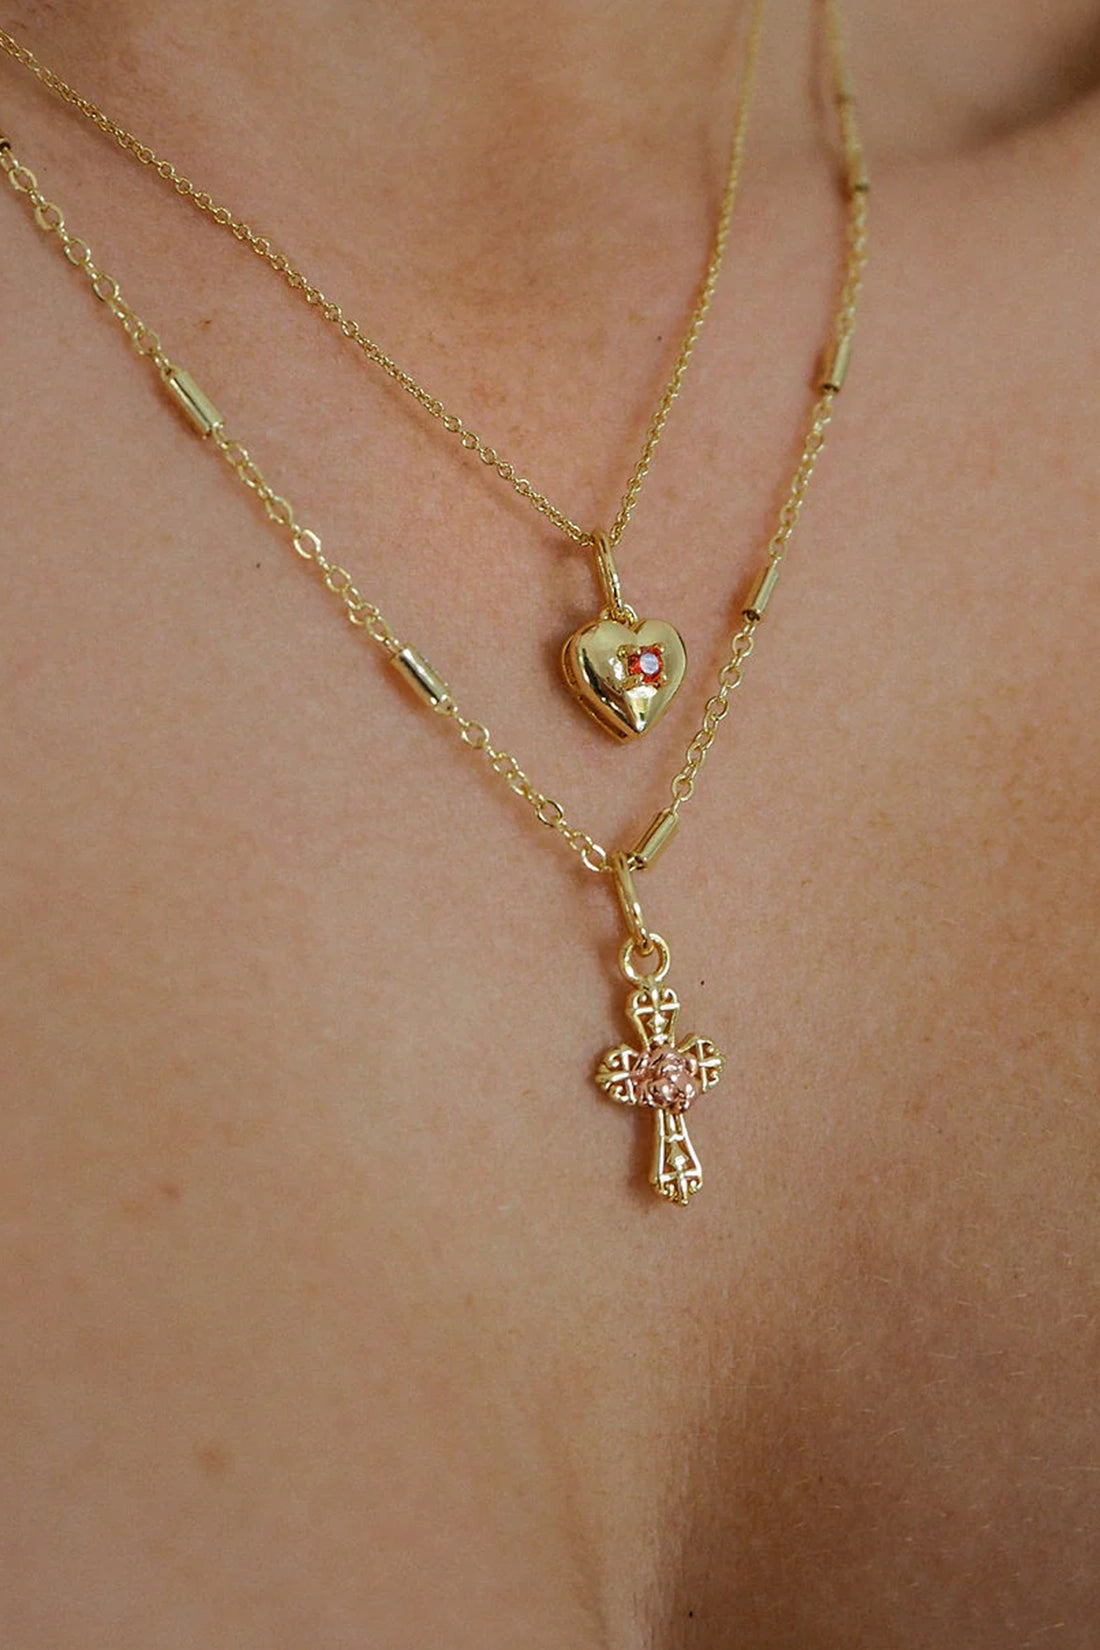 The Cross My Heart Charm Necklace - Gold